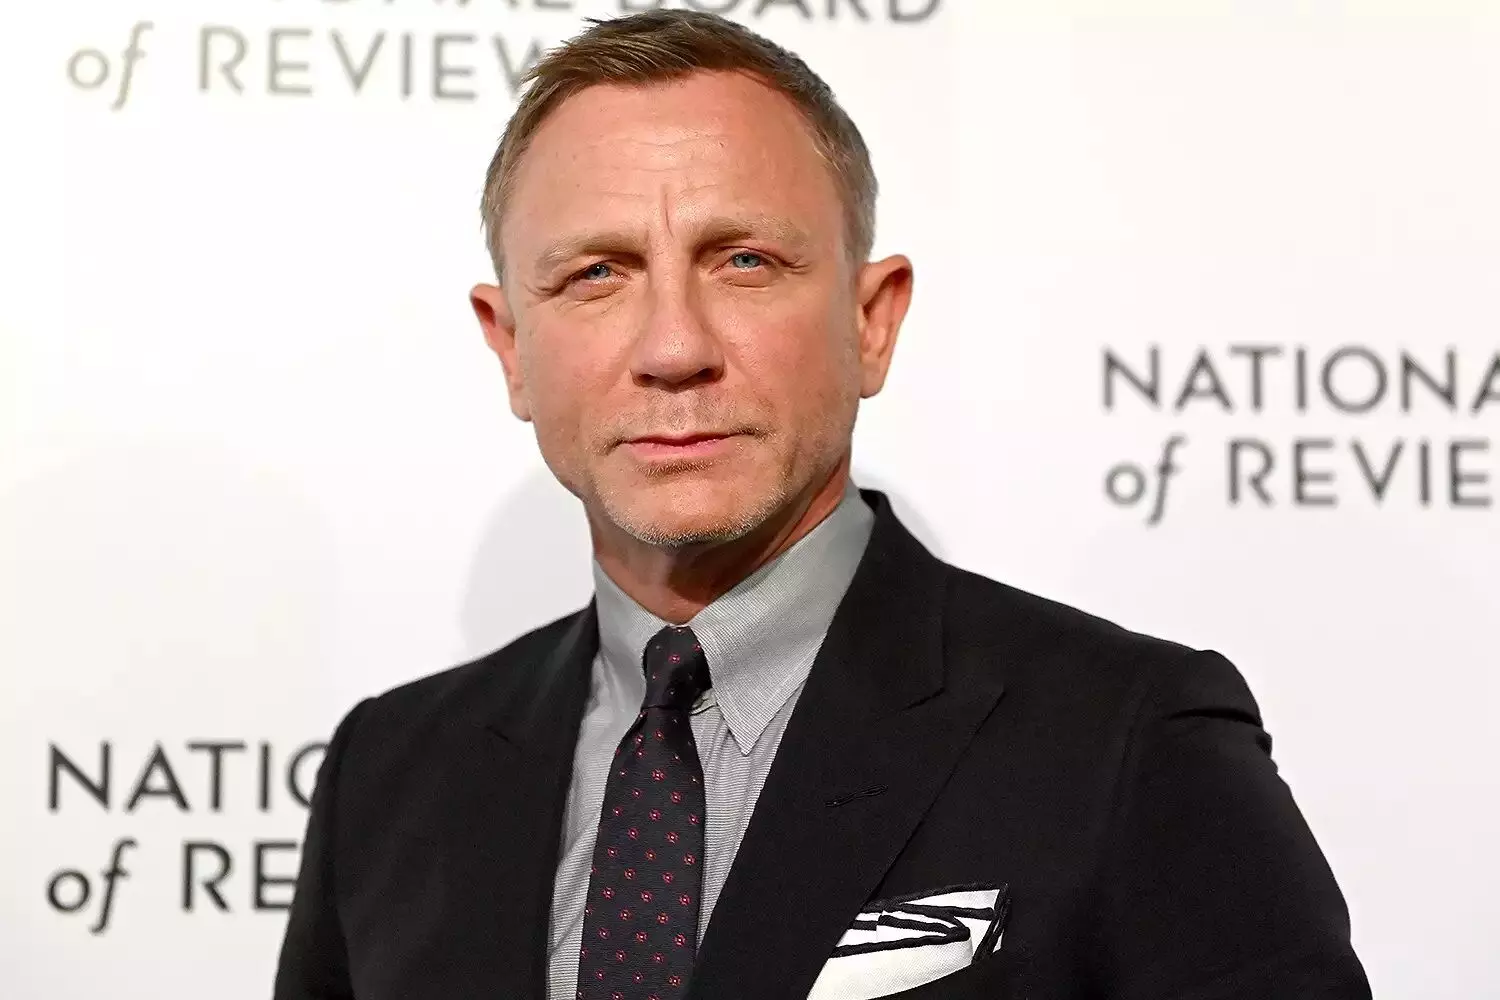 Daniel Craig tests positive for COVID-19, Macbeth shows on Broadway cancelled